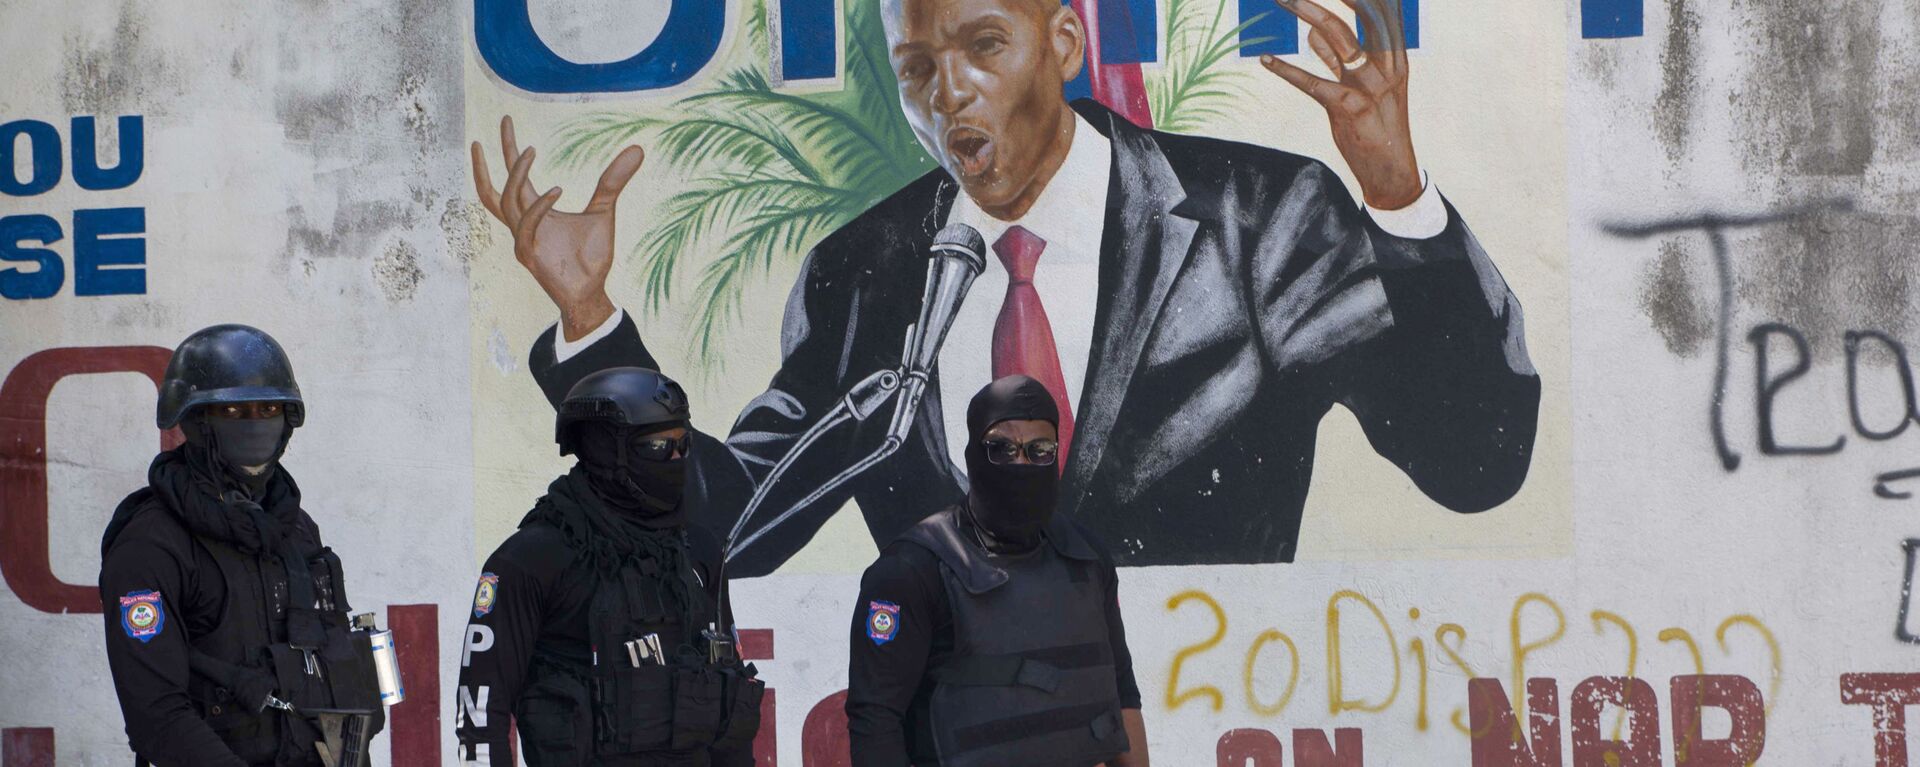 Police stand near a mural featuring Haitian President Jovenel Moise, near the leader’s residence where he was killed by gunmen in the early morning hours in Port-au-Prince, Haiti, Wednesday, July 7, 2021. - Sputnik International, 1920, 04.08.2021